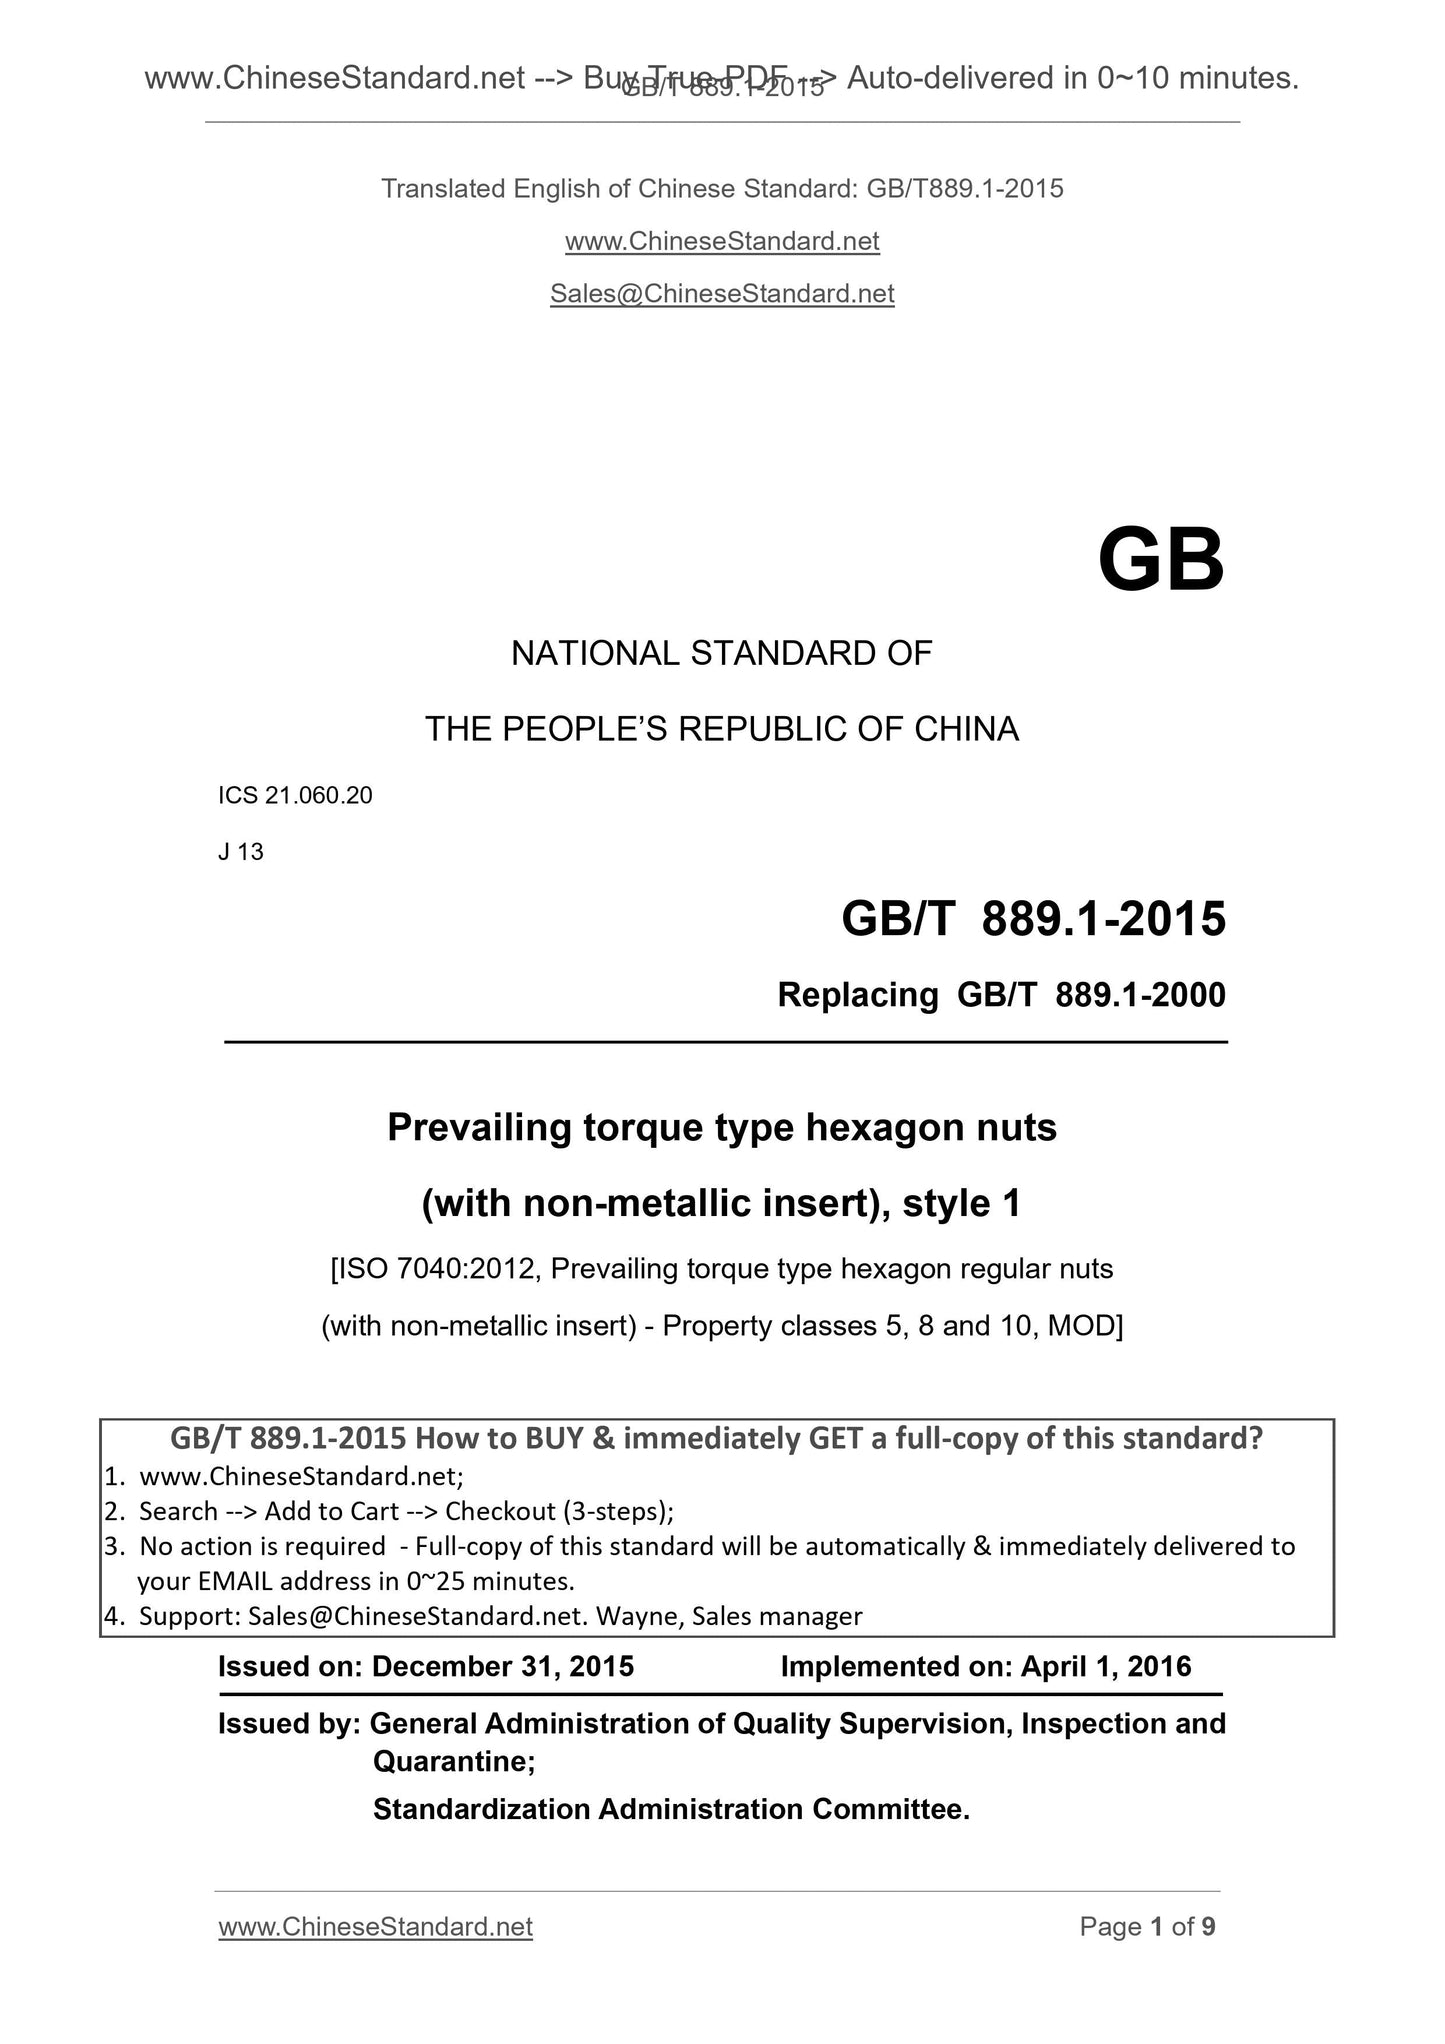 GB/T 889.1-2015 Page 1